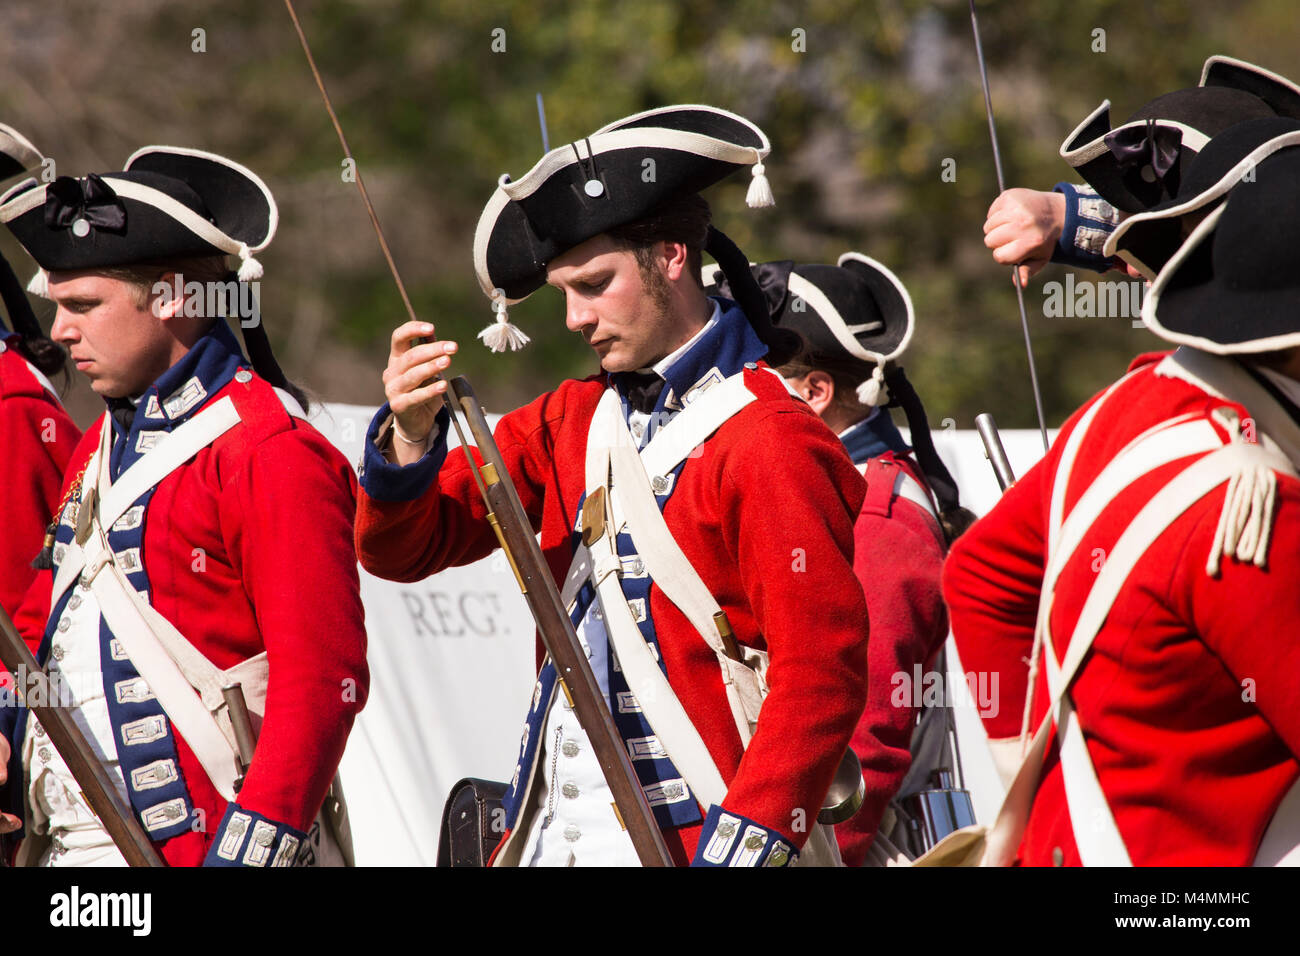 British redcoat soldiers during a reenactment of the American revolution in  "Huntington central park" Huntington Beach California USA Stock Photo -  Alamy